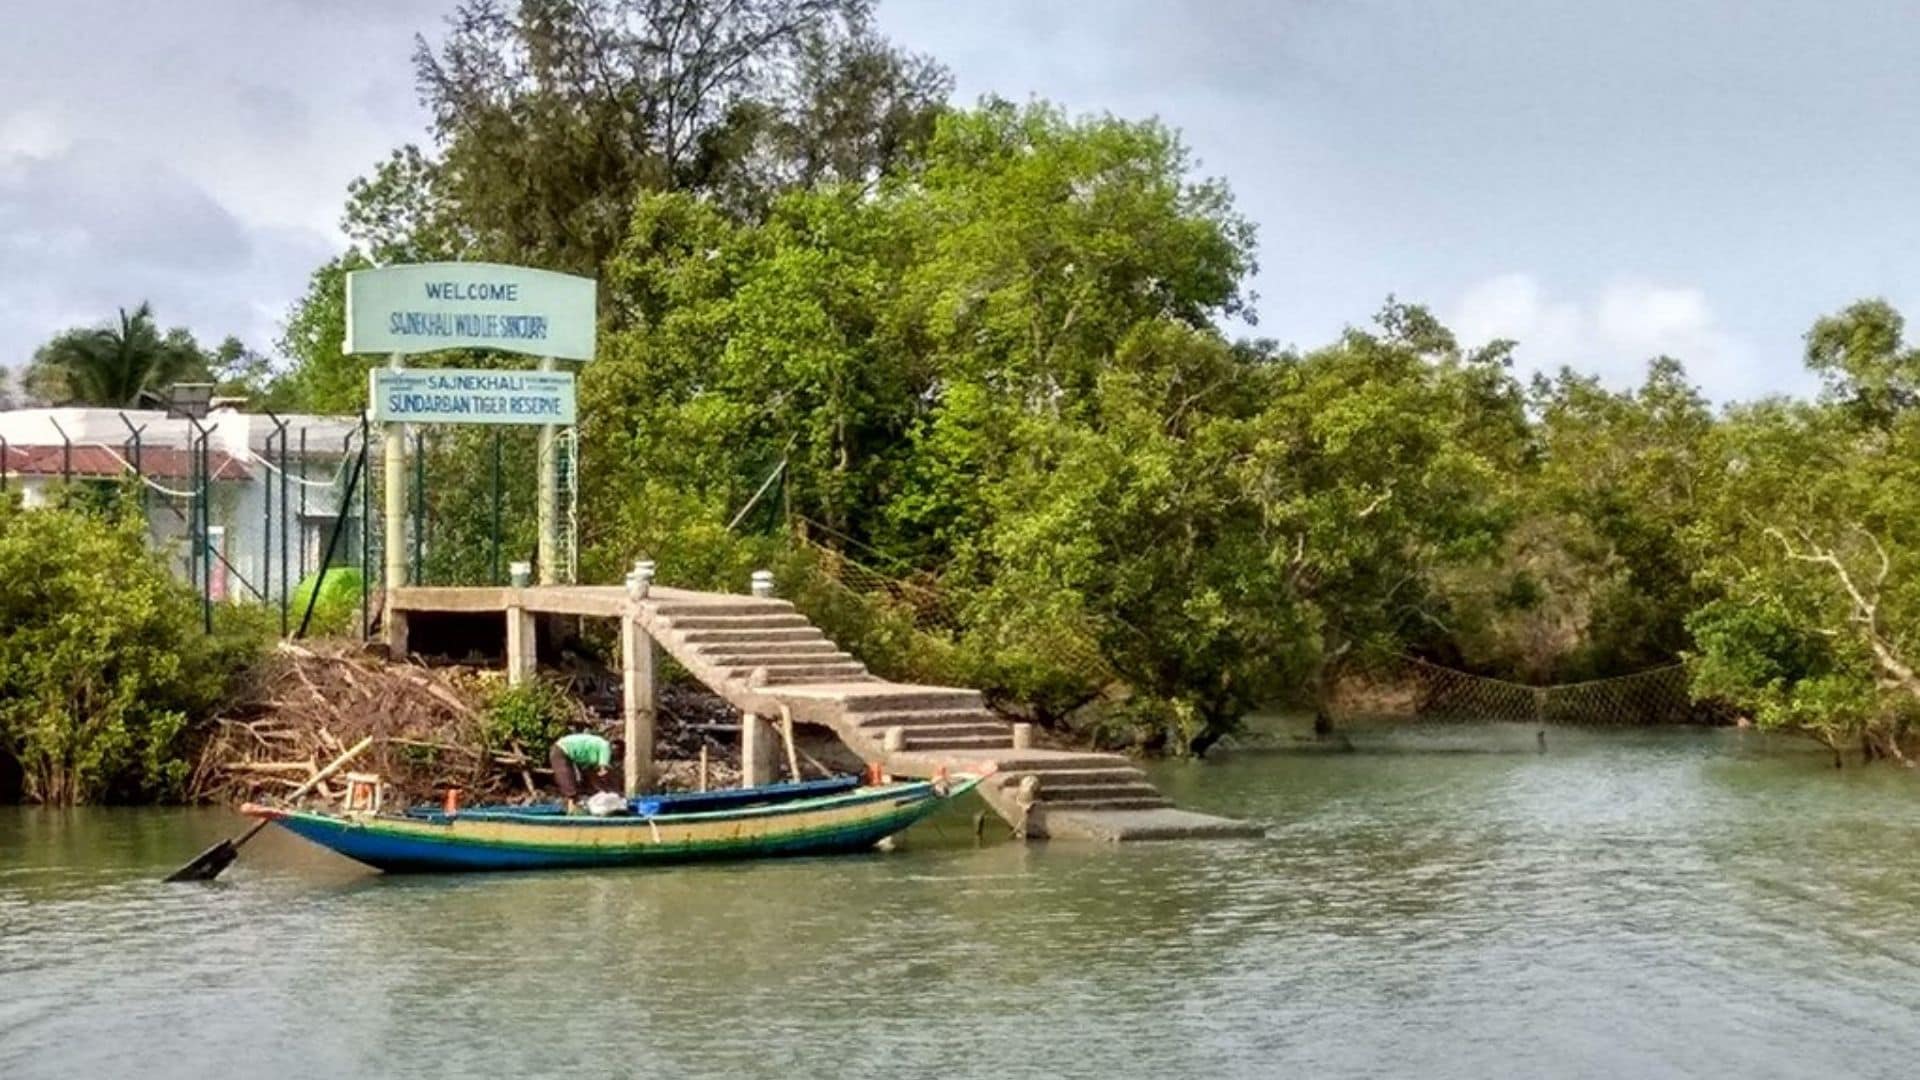 <p>One of the few concrete jetties in the Indian part of the Sundarbans, at the entrance to the Sajnekhali wildlife sanctuary [image by: CUTS]</p>